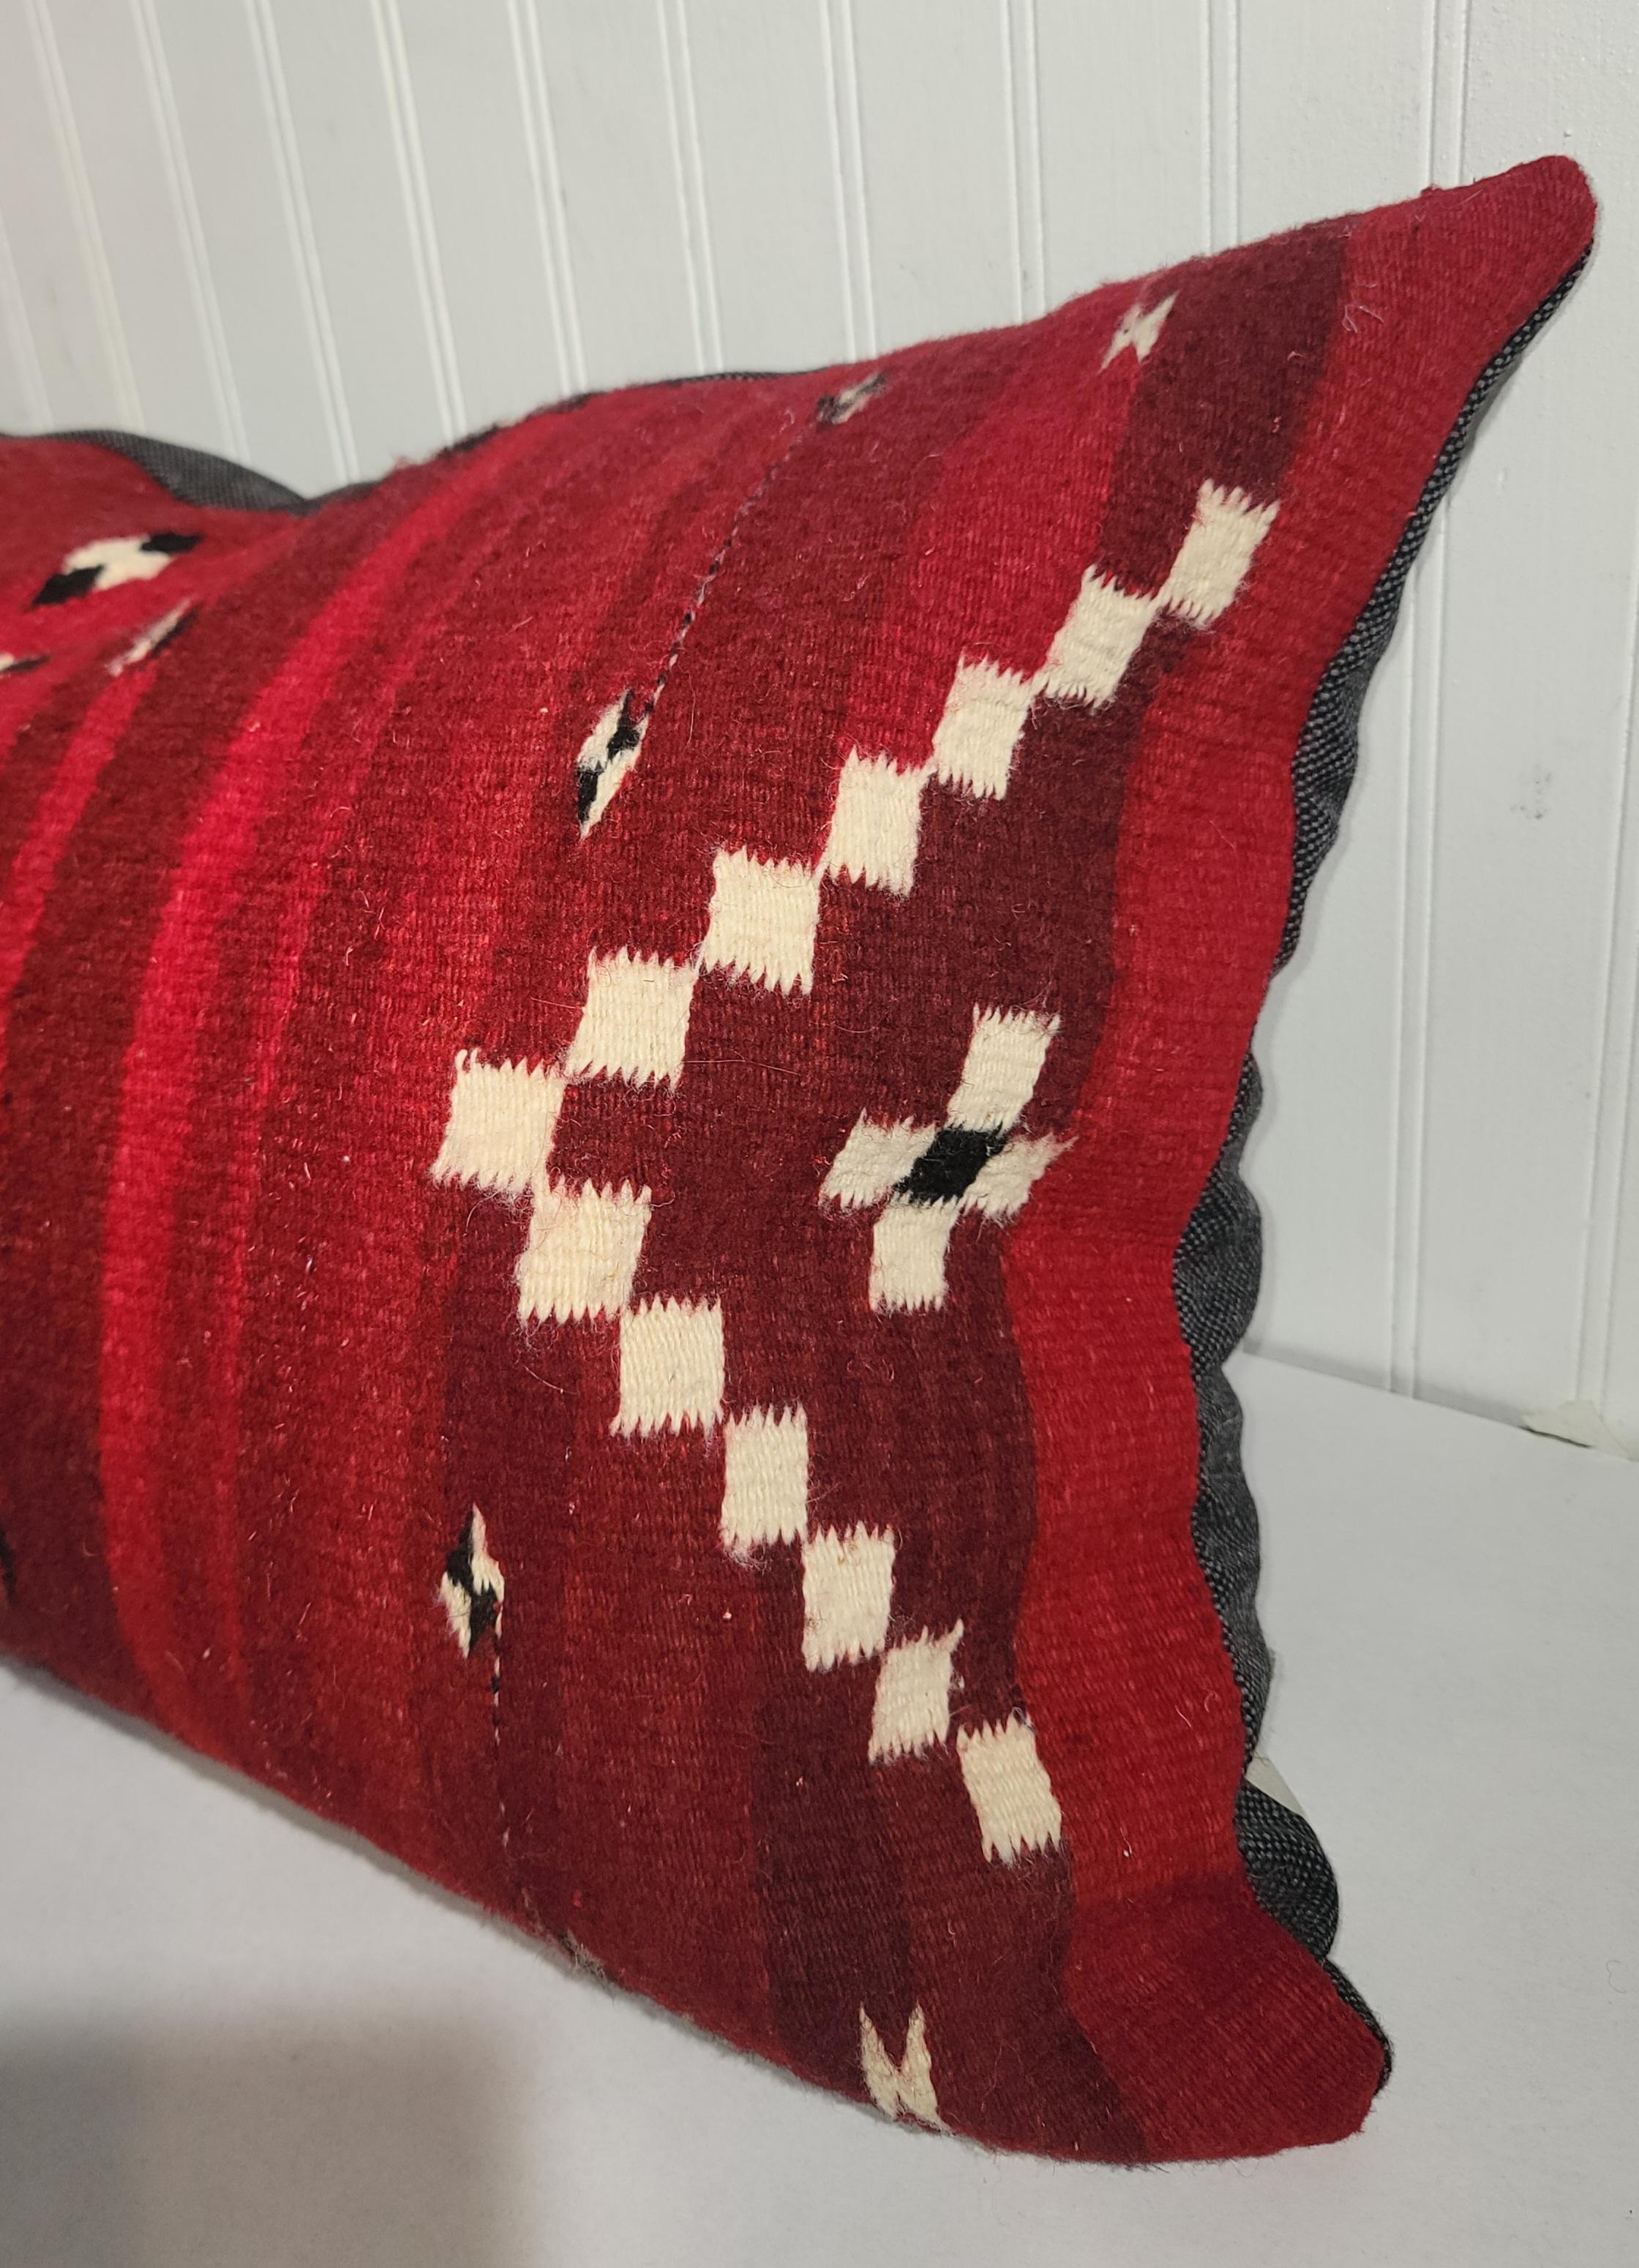 Hand woven Navajo weaving bolster pillow.This was a saddle blanket weaving made into a pillow.